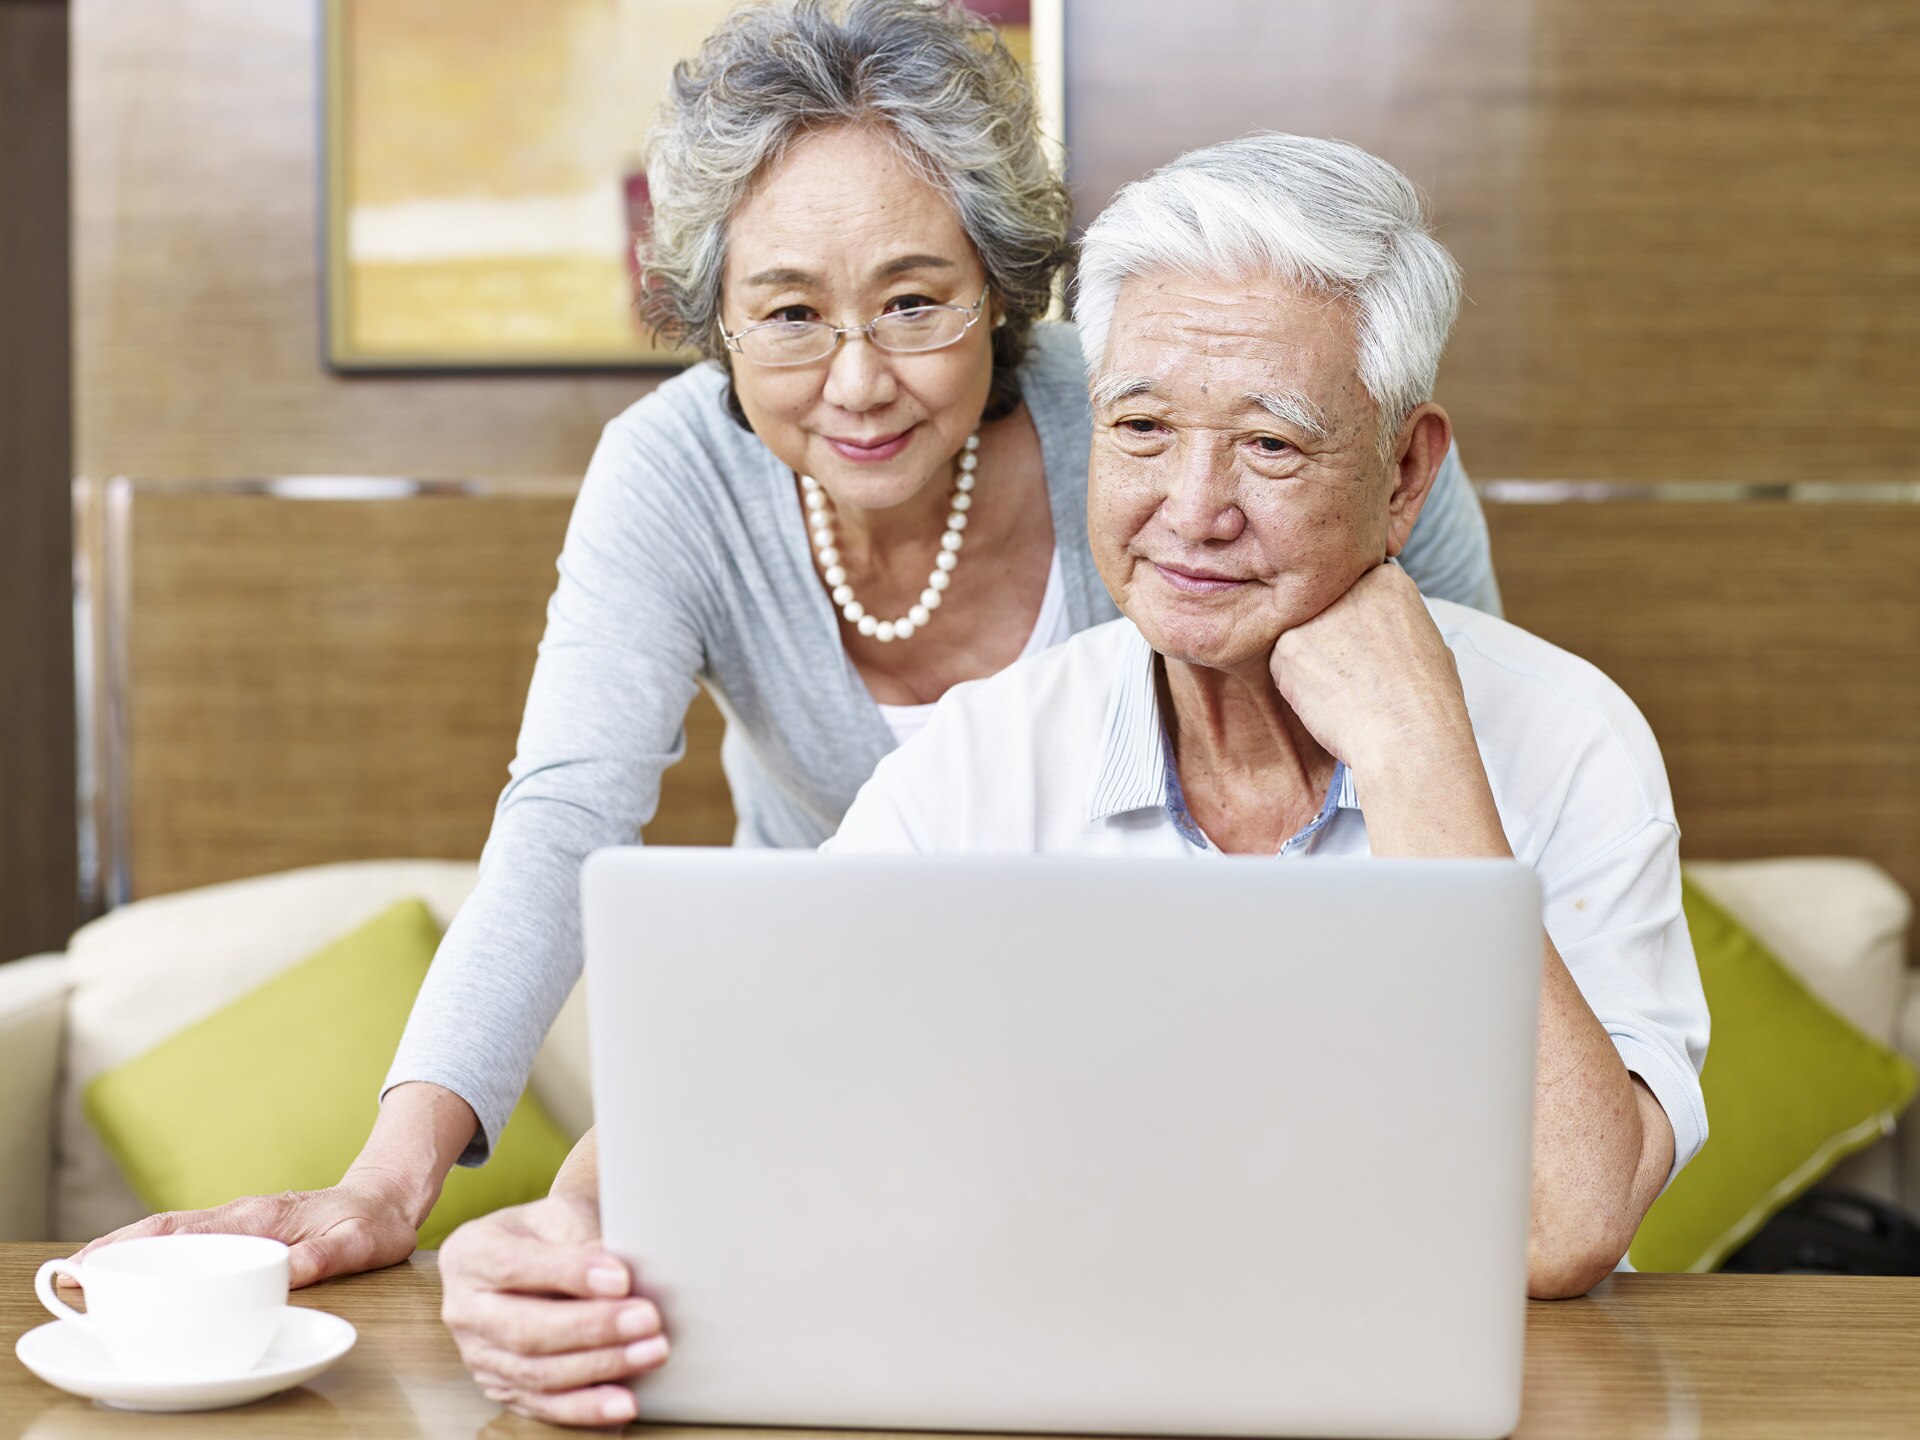 loving senior asian couple using a laptop computer together.; Shutterstock ID 523998844; purchase_order: -; job: -; client: -; other: -